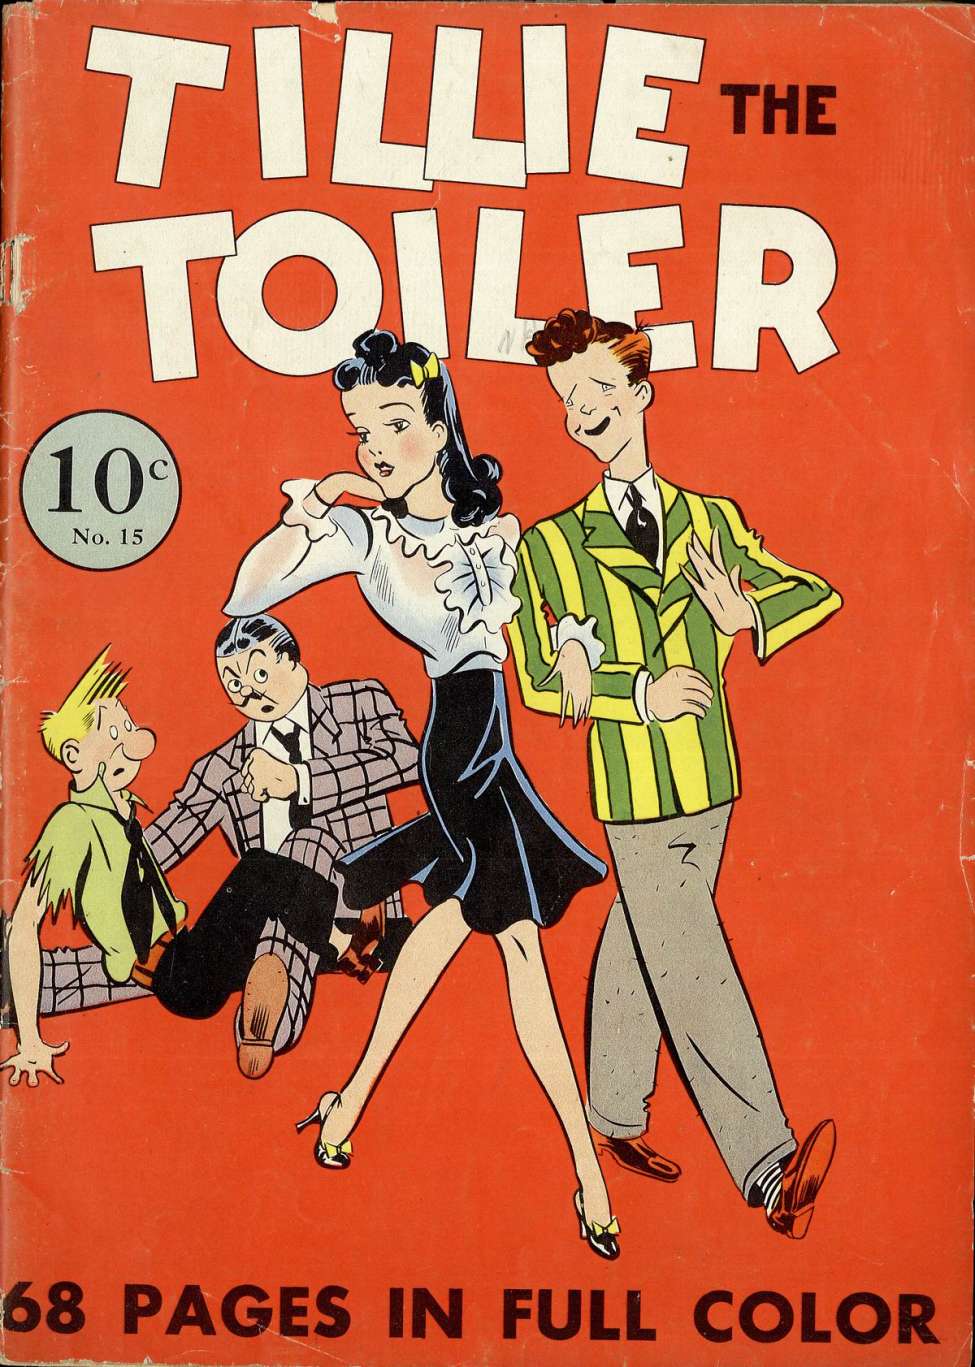 Book Cover For 15 - Tillie the Toiler